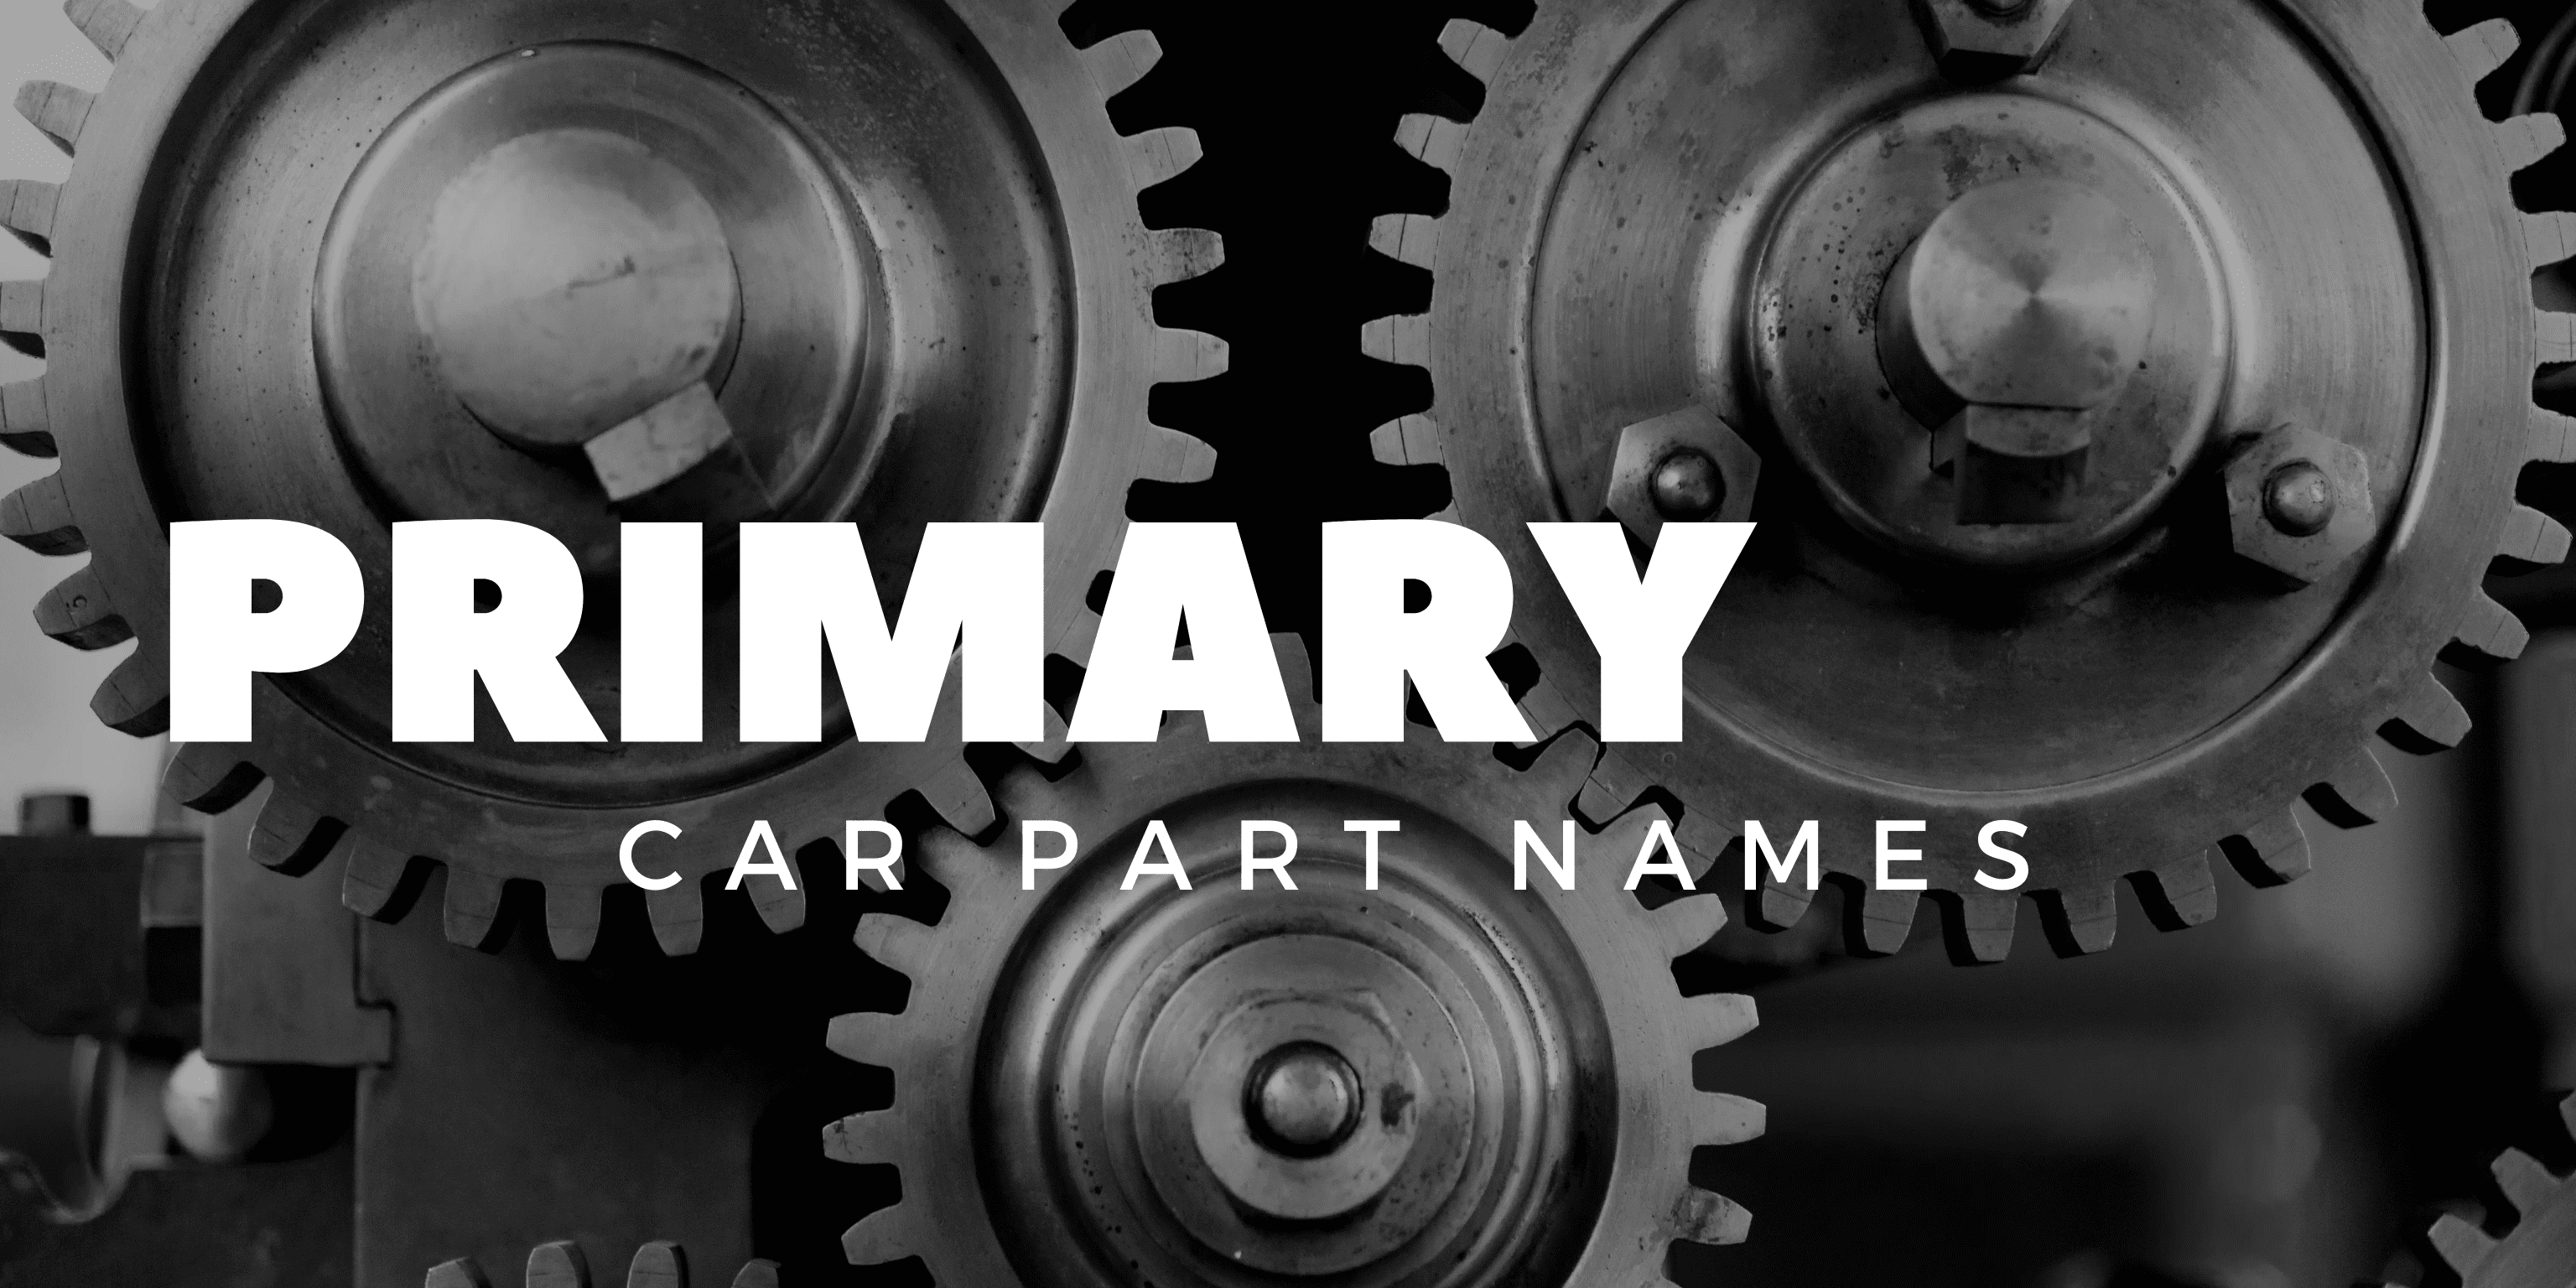 What Are the Primary Car Part Names You Need to Know?